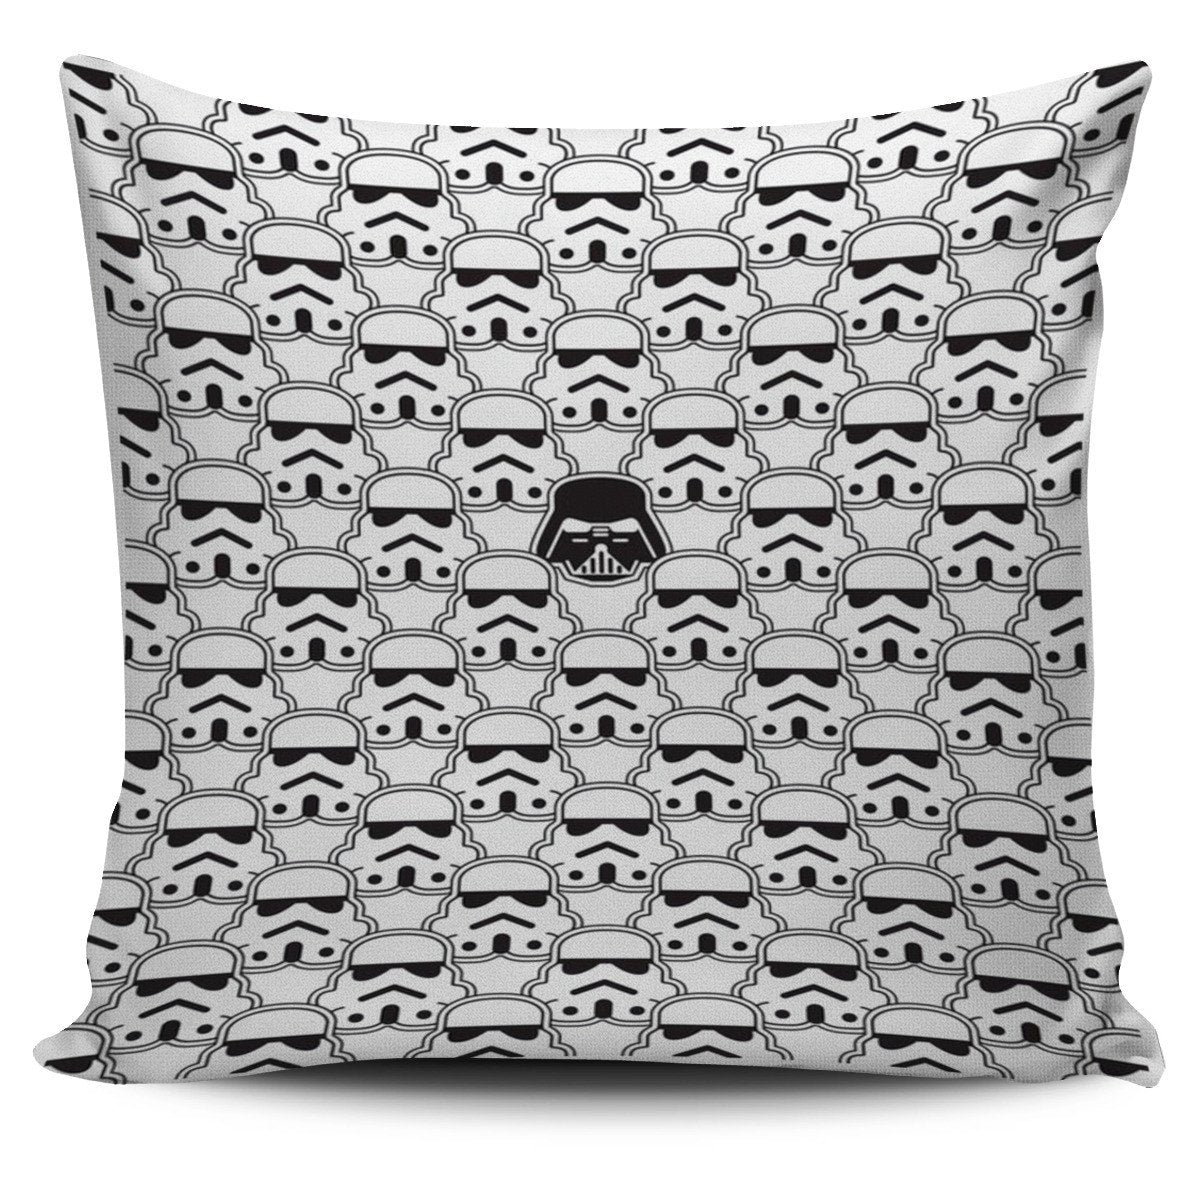 Star Wars Clone Trooper Pillow Cover